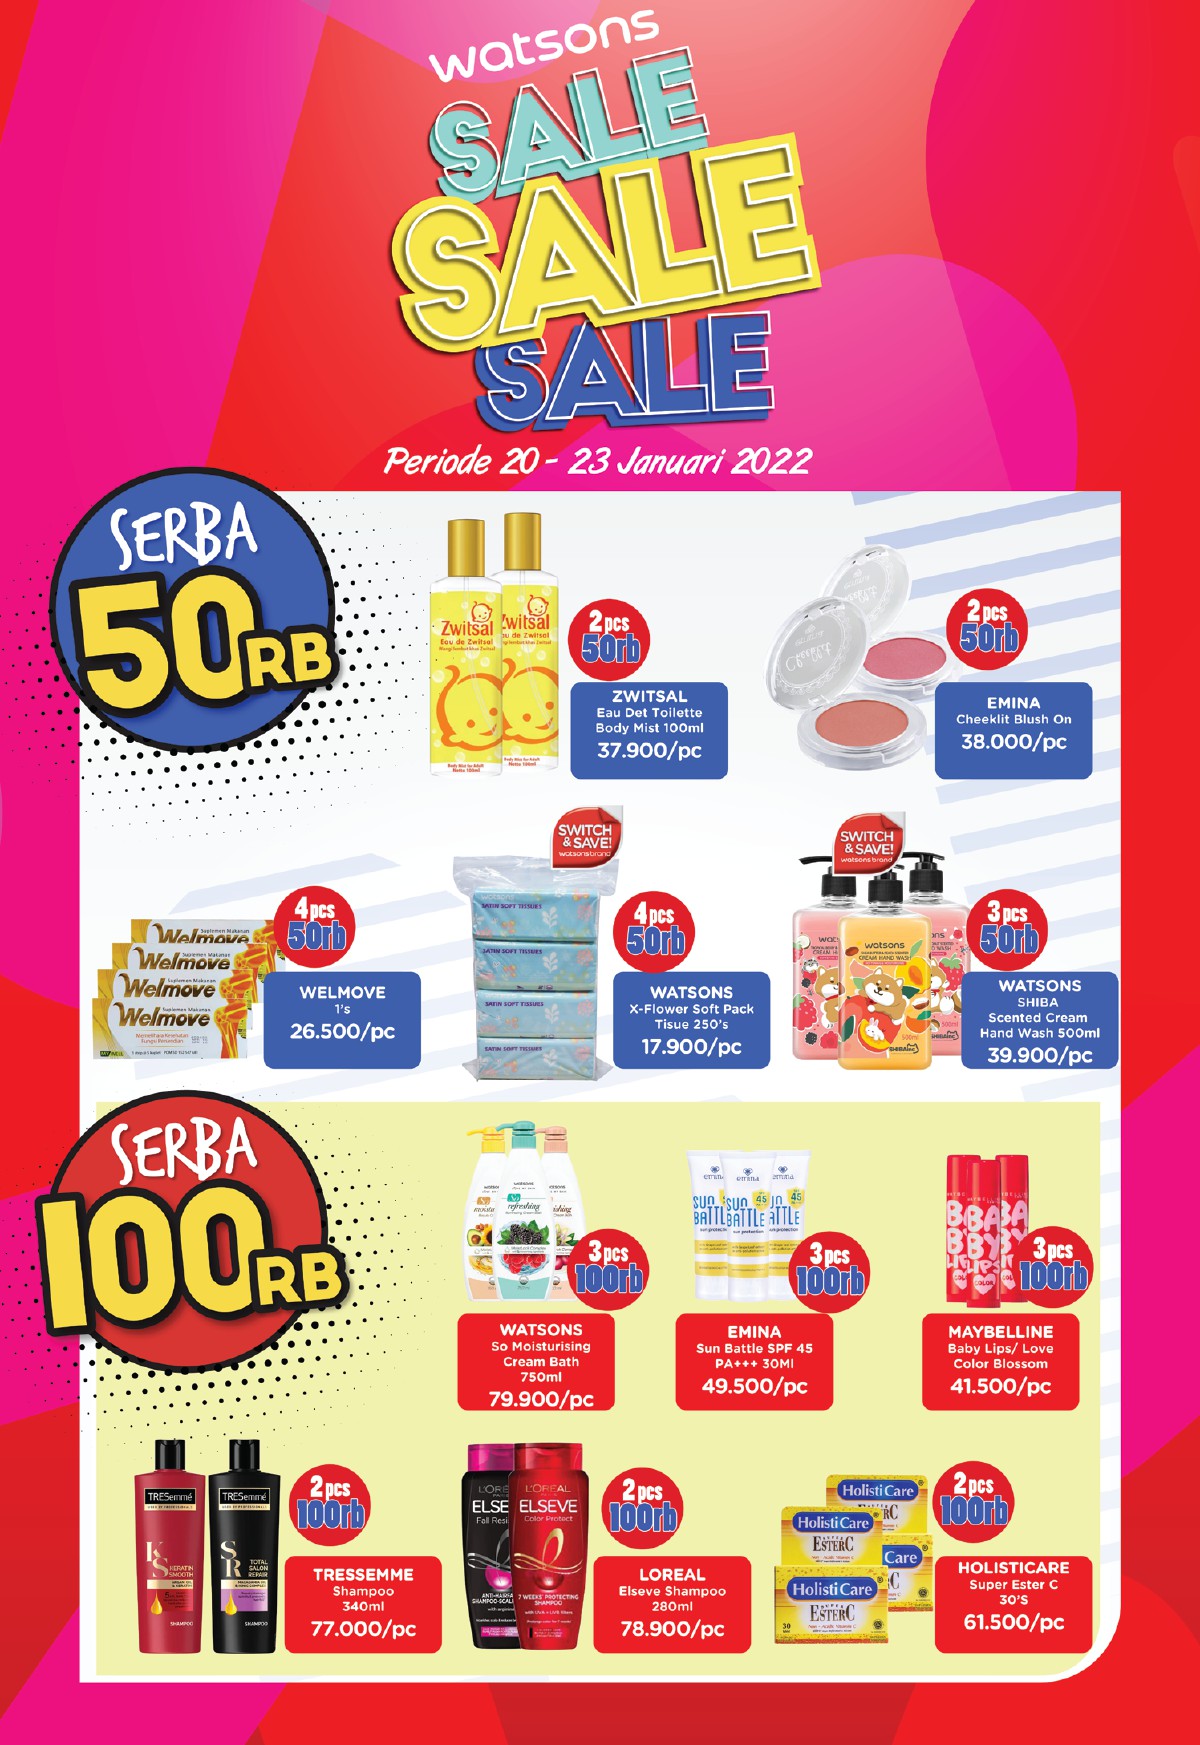 Promo WATSONS WEEKEND SALE up to 50% off - periode 20-23 JANUARI 2022